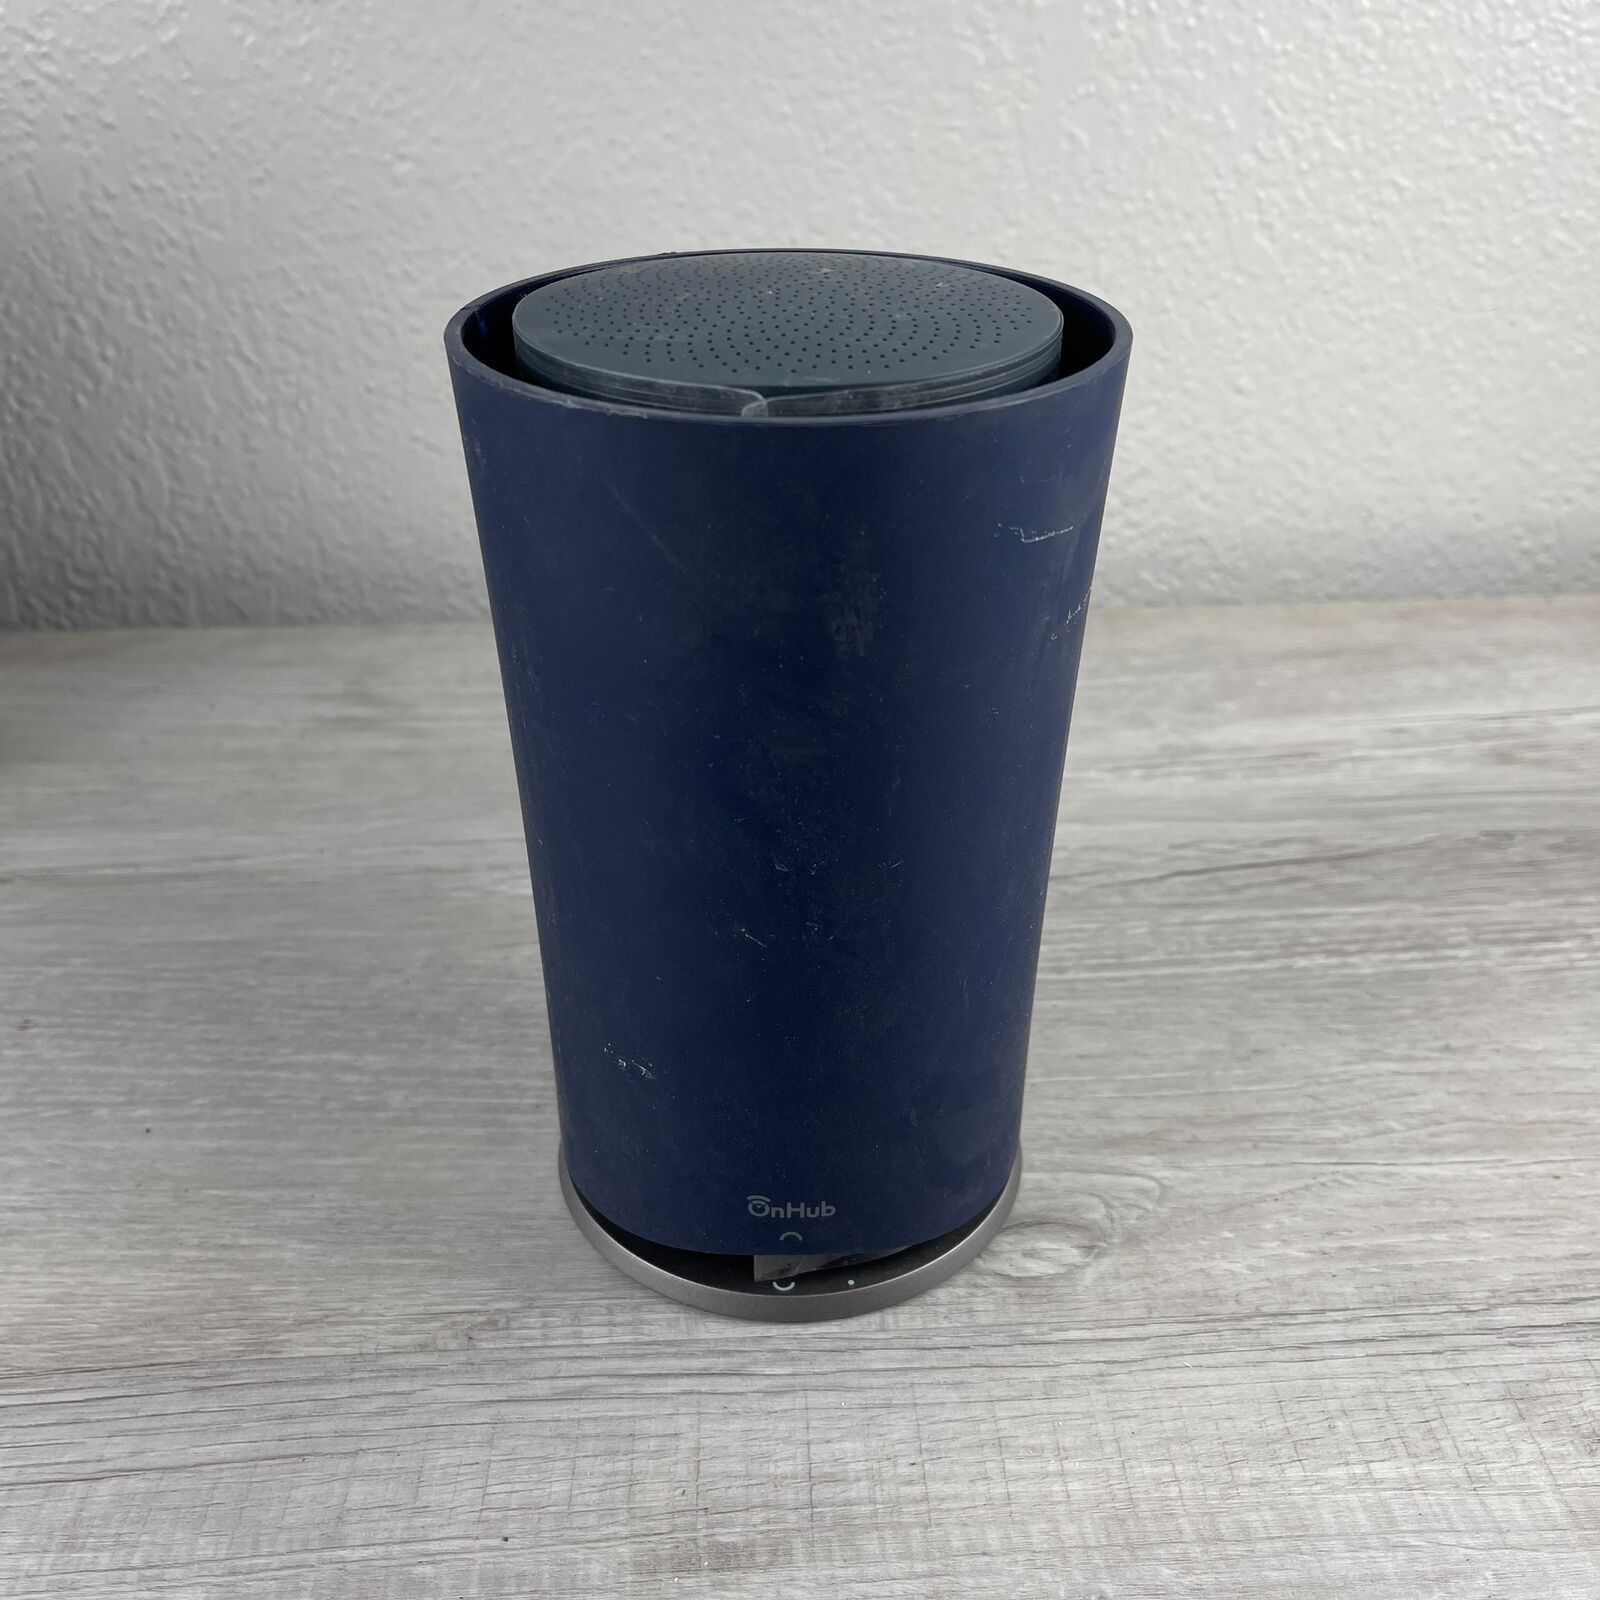 TP-Link TGR1900 OnHub Blue Wi-Fi Dual-Band Wireless Router For Smartphones